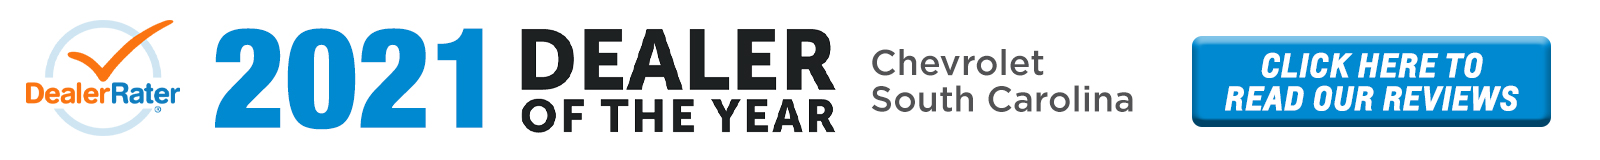 dealer of the year banner